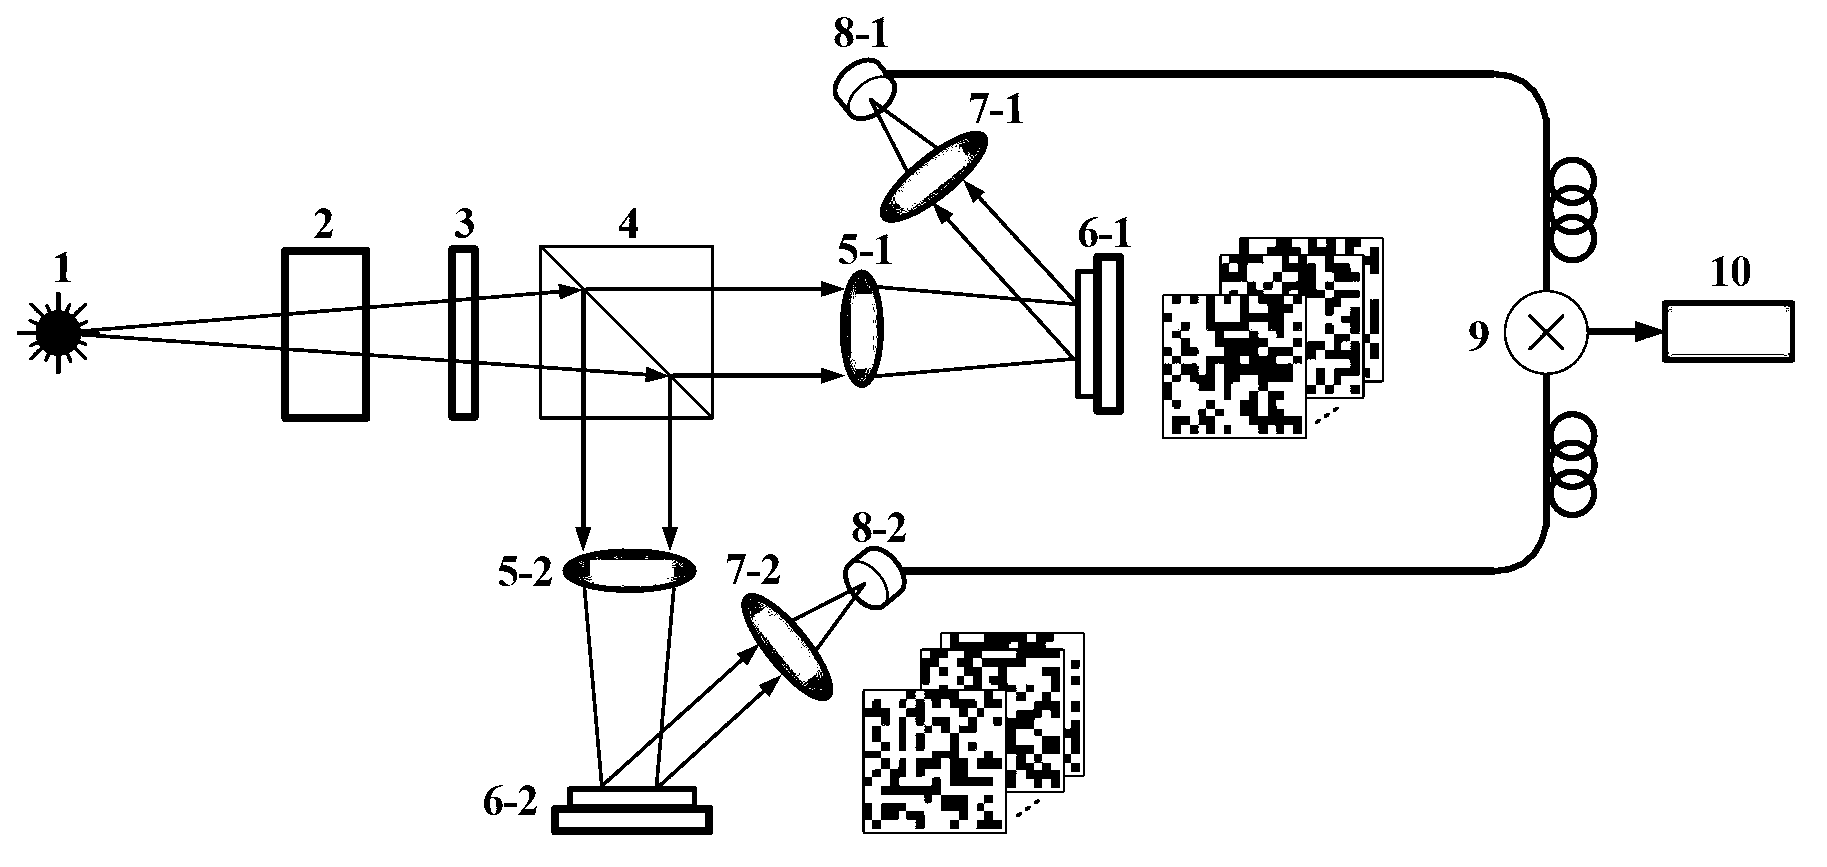 Entanglement imaging system and method based on dual-compression coincidence measurements